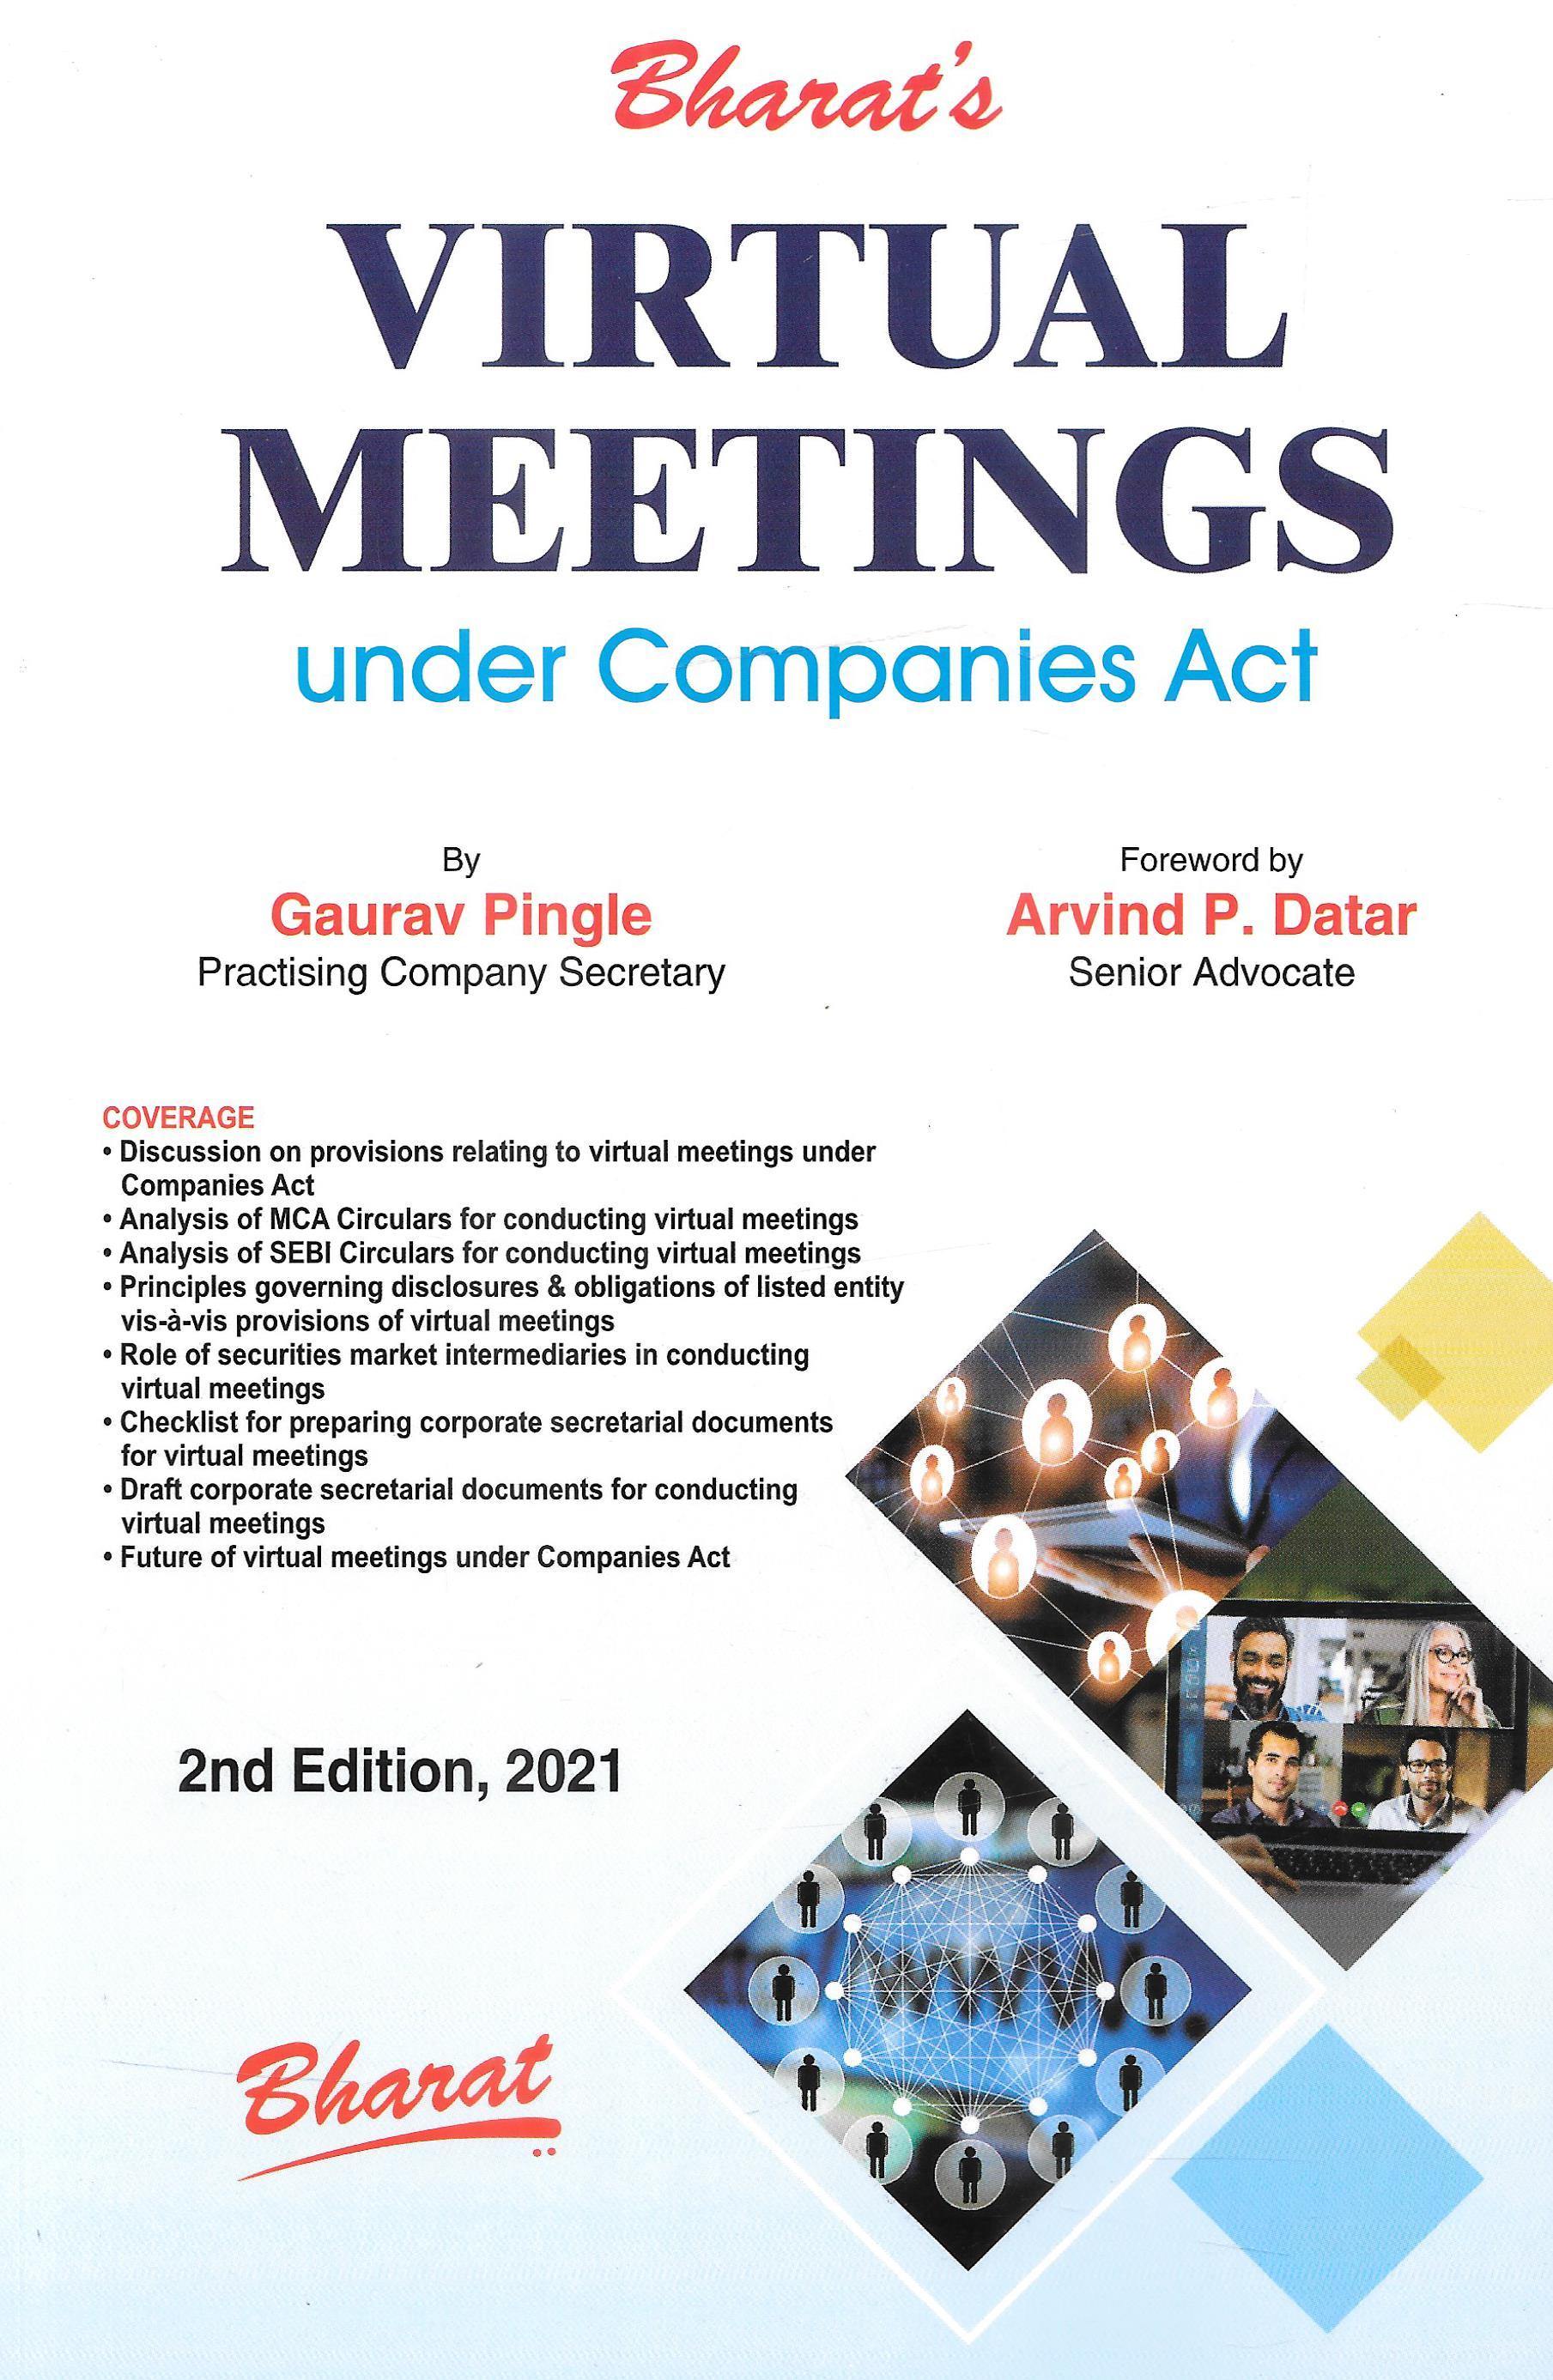 Virtual Meeting under Companies Act - M&J Services